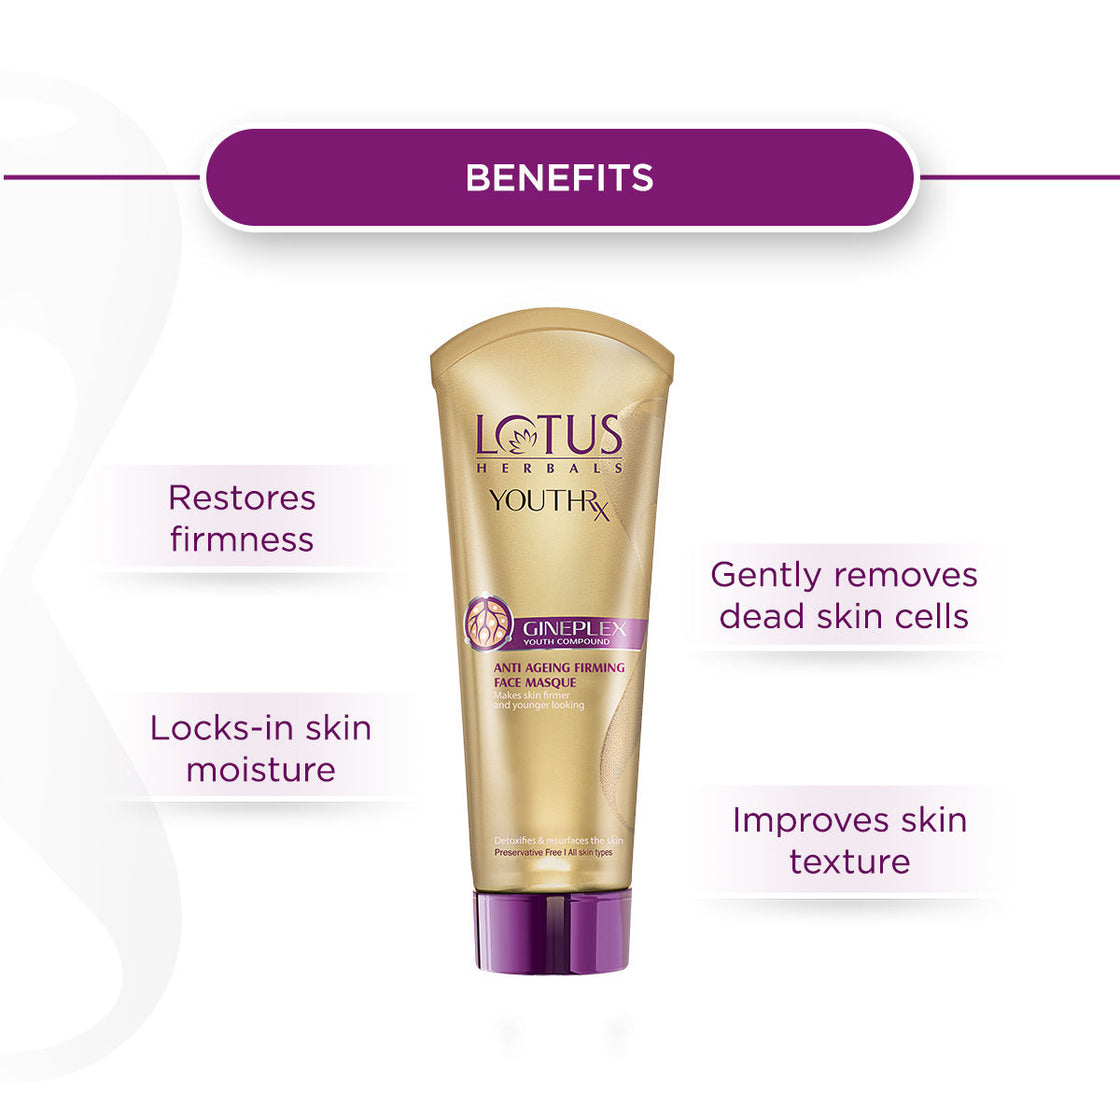 Lotus Herbals YouthRx Anti-Ageing Firming Face Masque (80g)